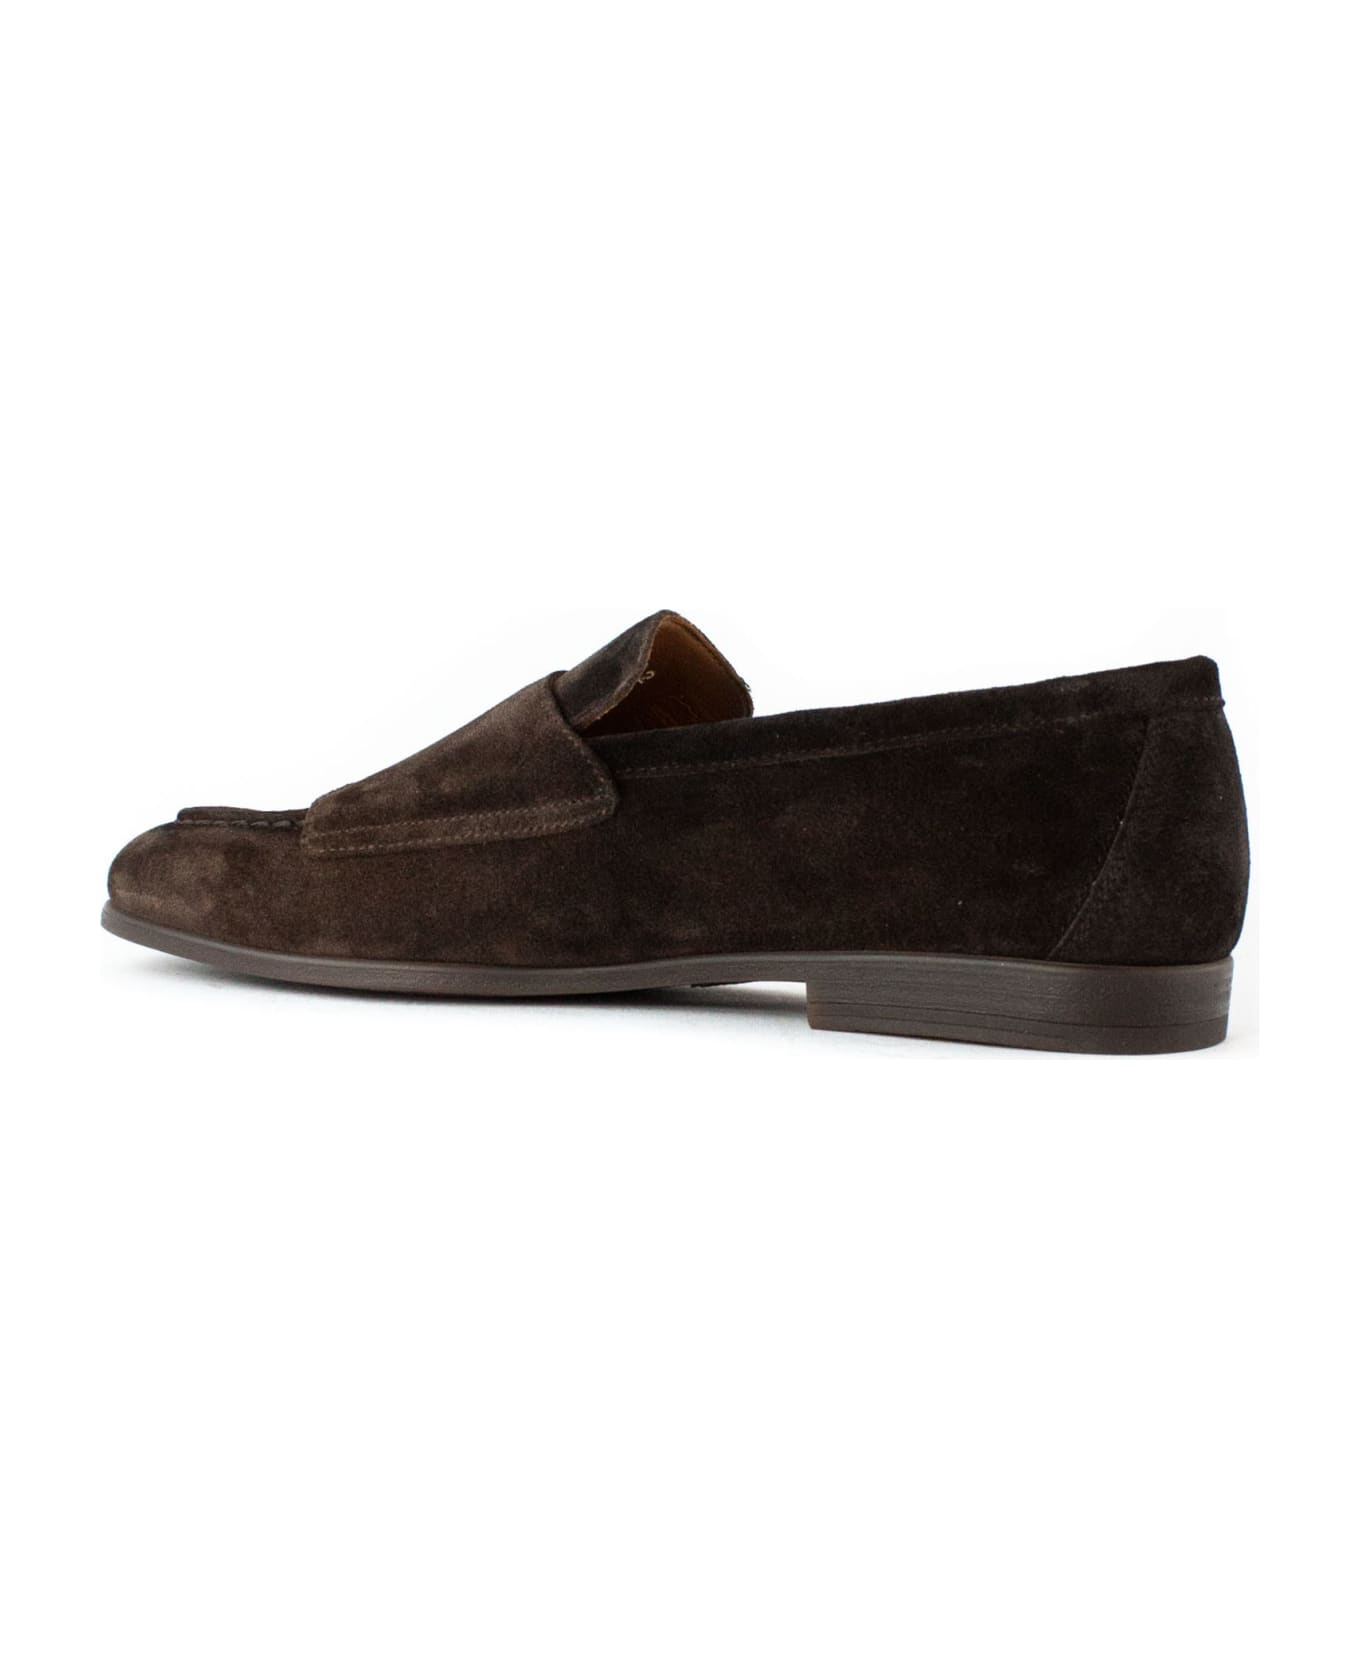 Doucal's Brown Suede Leather Loafer - Brown ローファー＆デッキシューズ